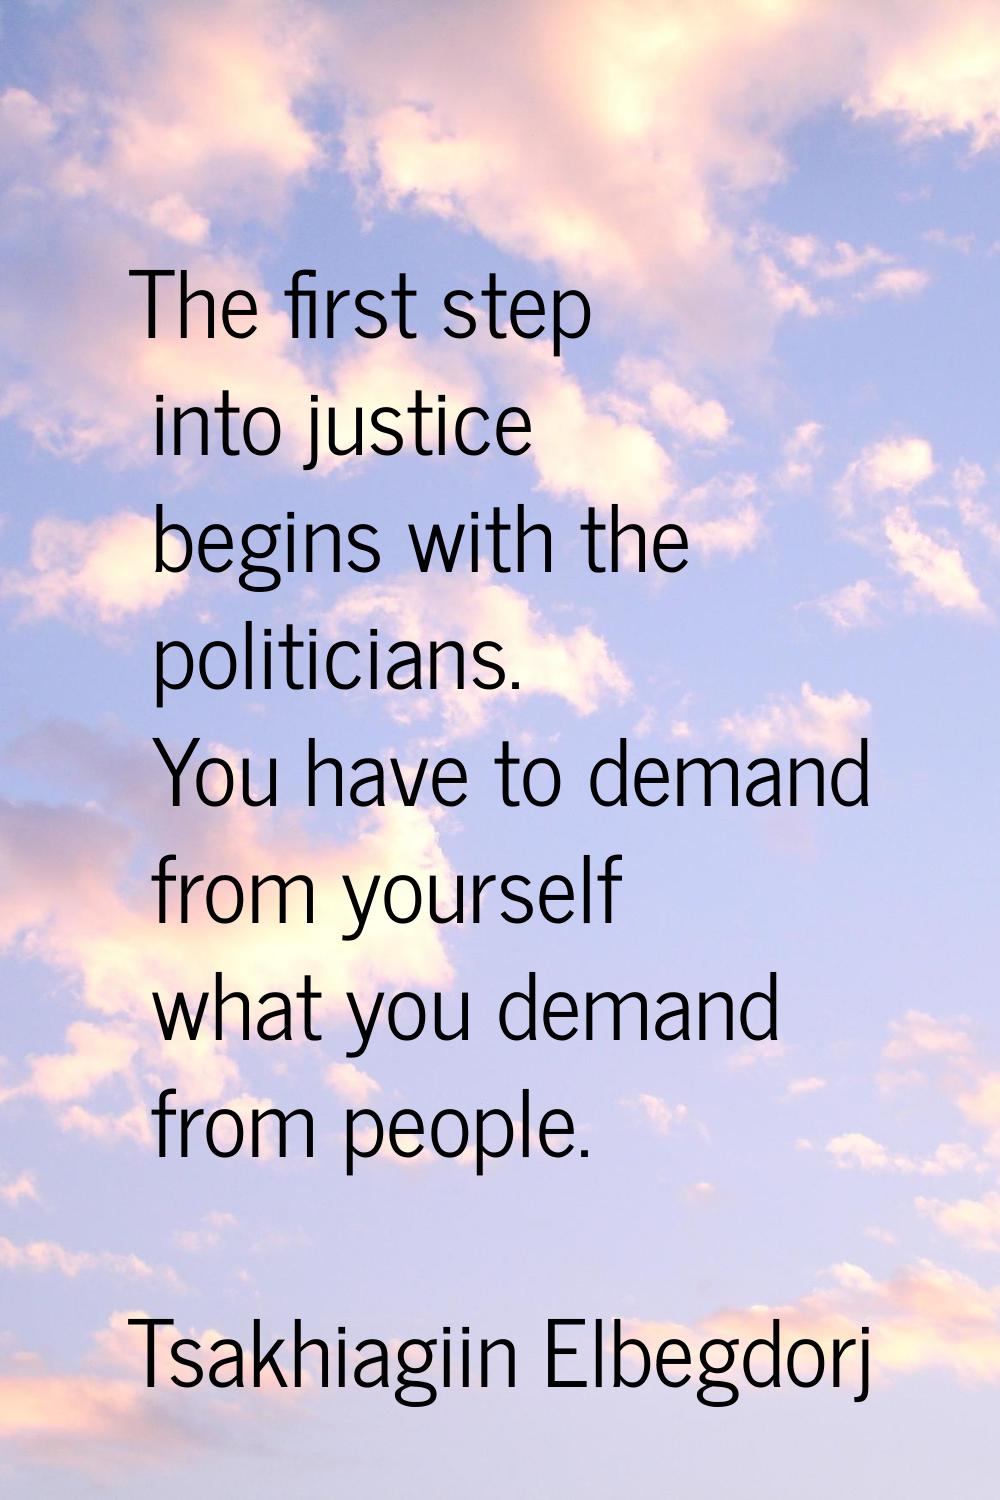 The first step into justice begins with the politicians. You have to demand from yourself what you 